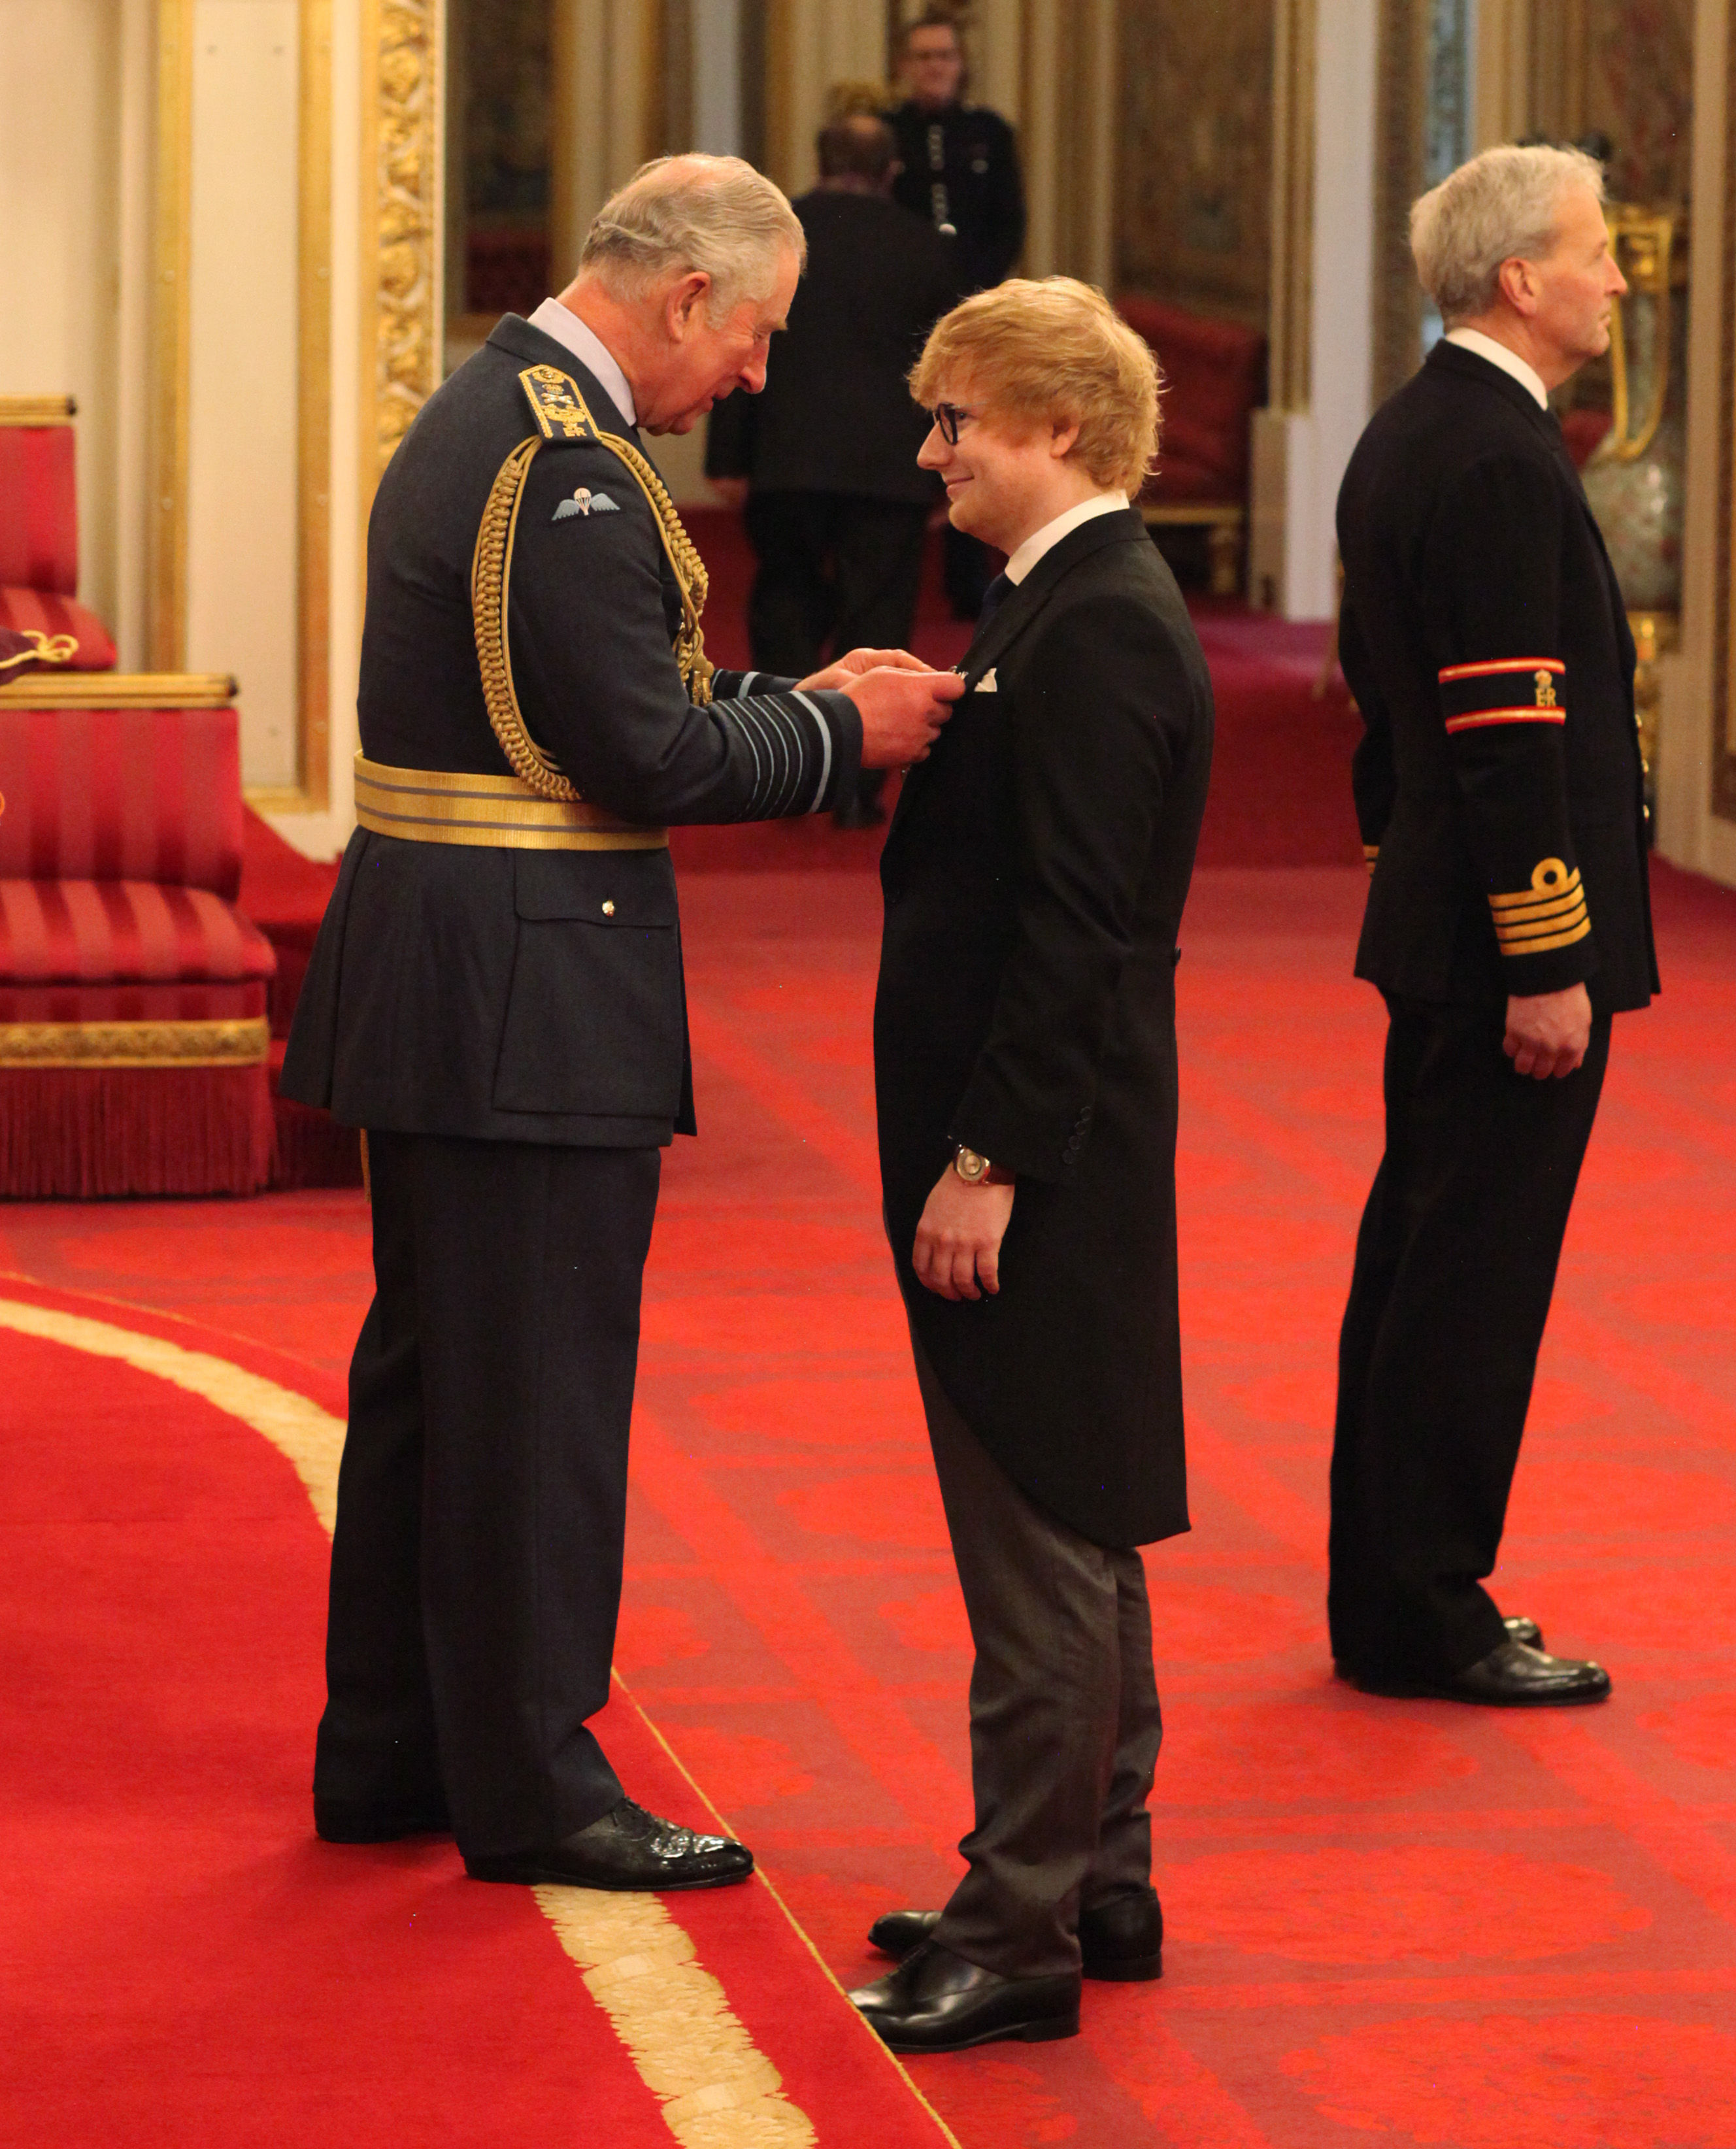 Ed Sheeran is made an MBE by the Prince of Wales at a Buckingham Palace (Yui Mok/PA)